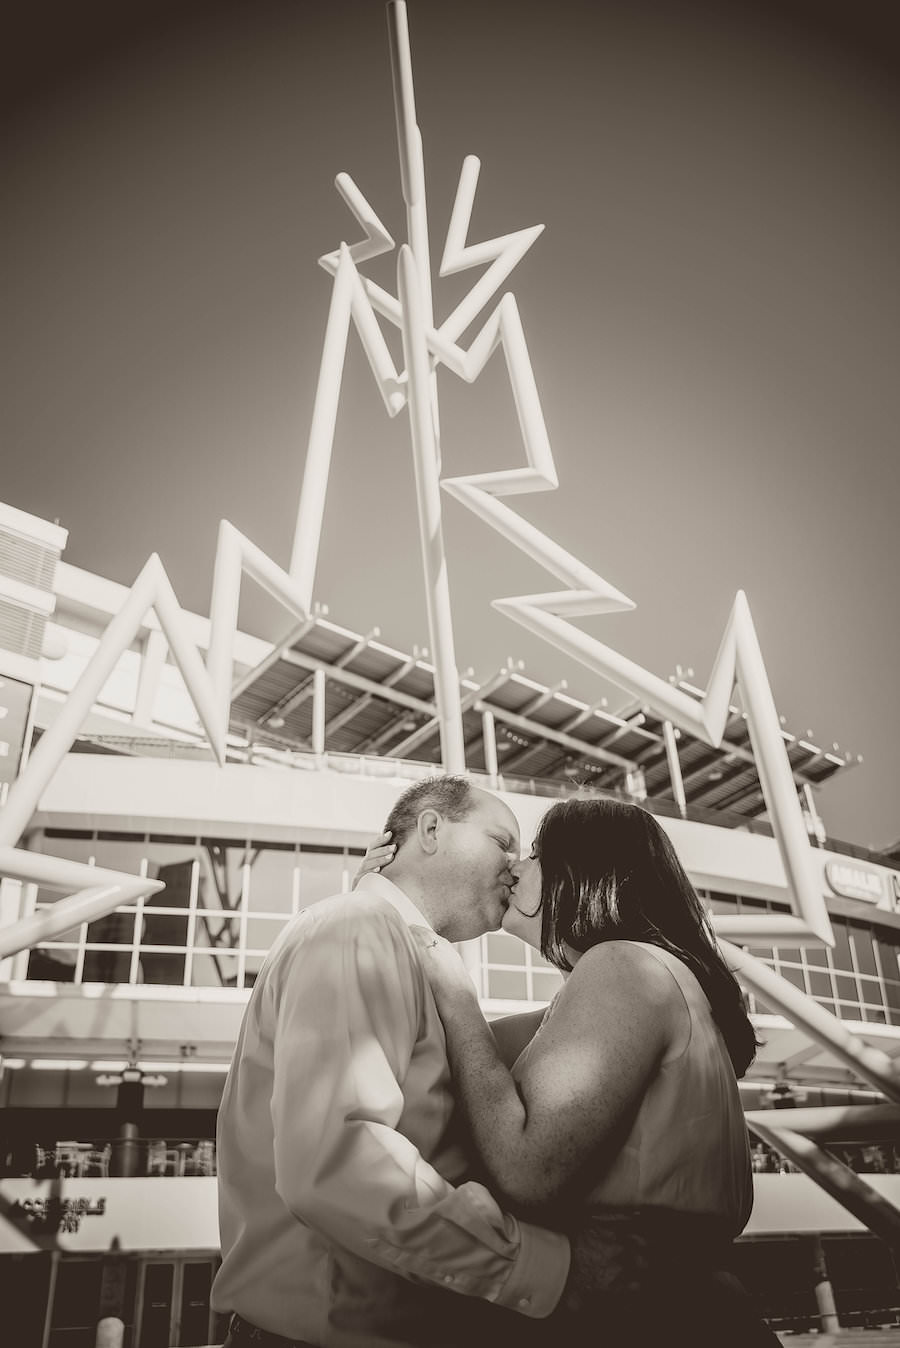 Tampa Lightning Themed Engagement Session at Amalie Arena | Kristen Marie Photography